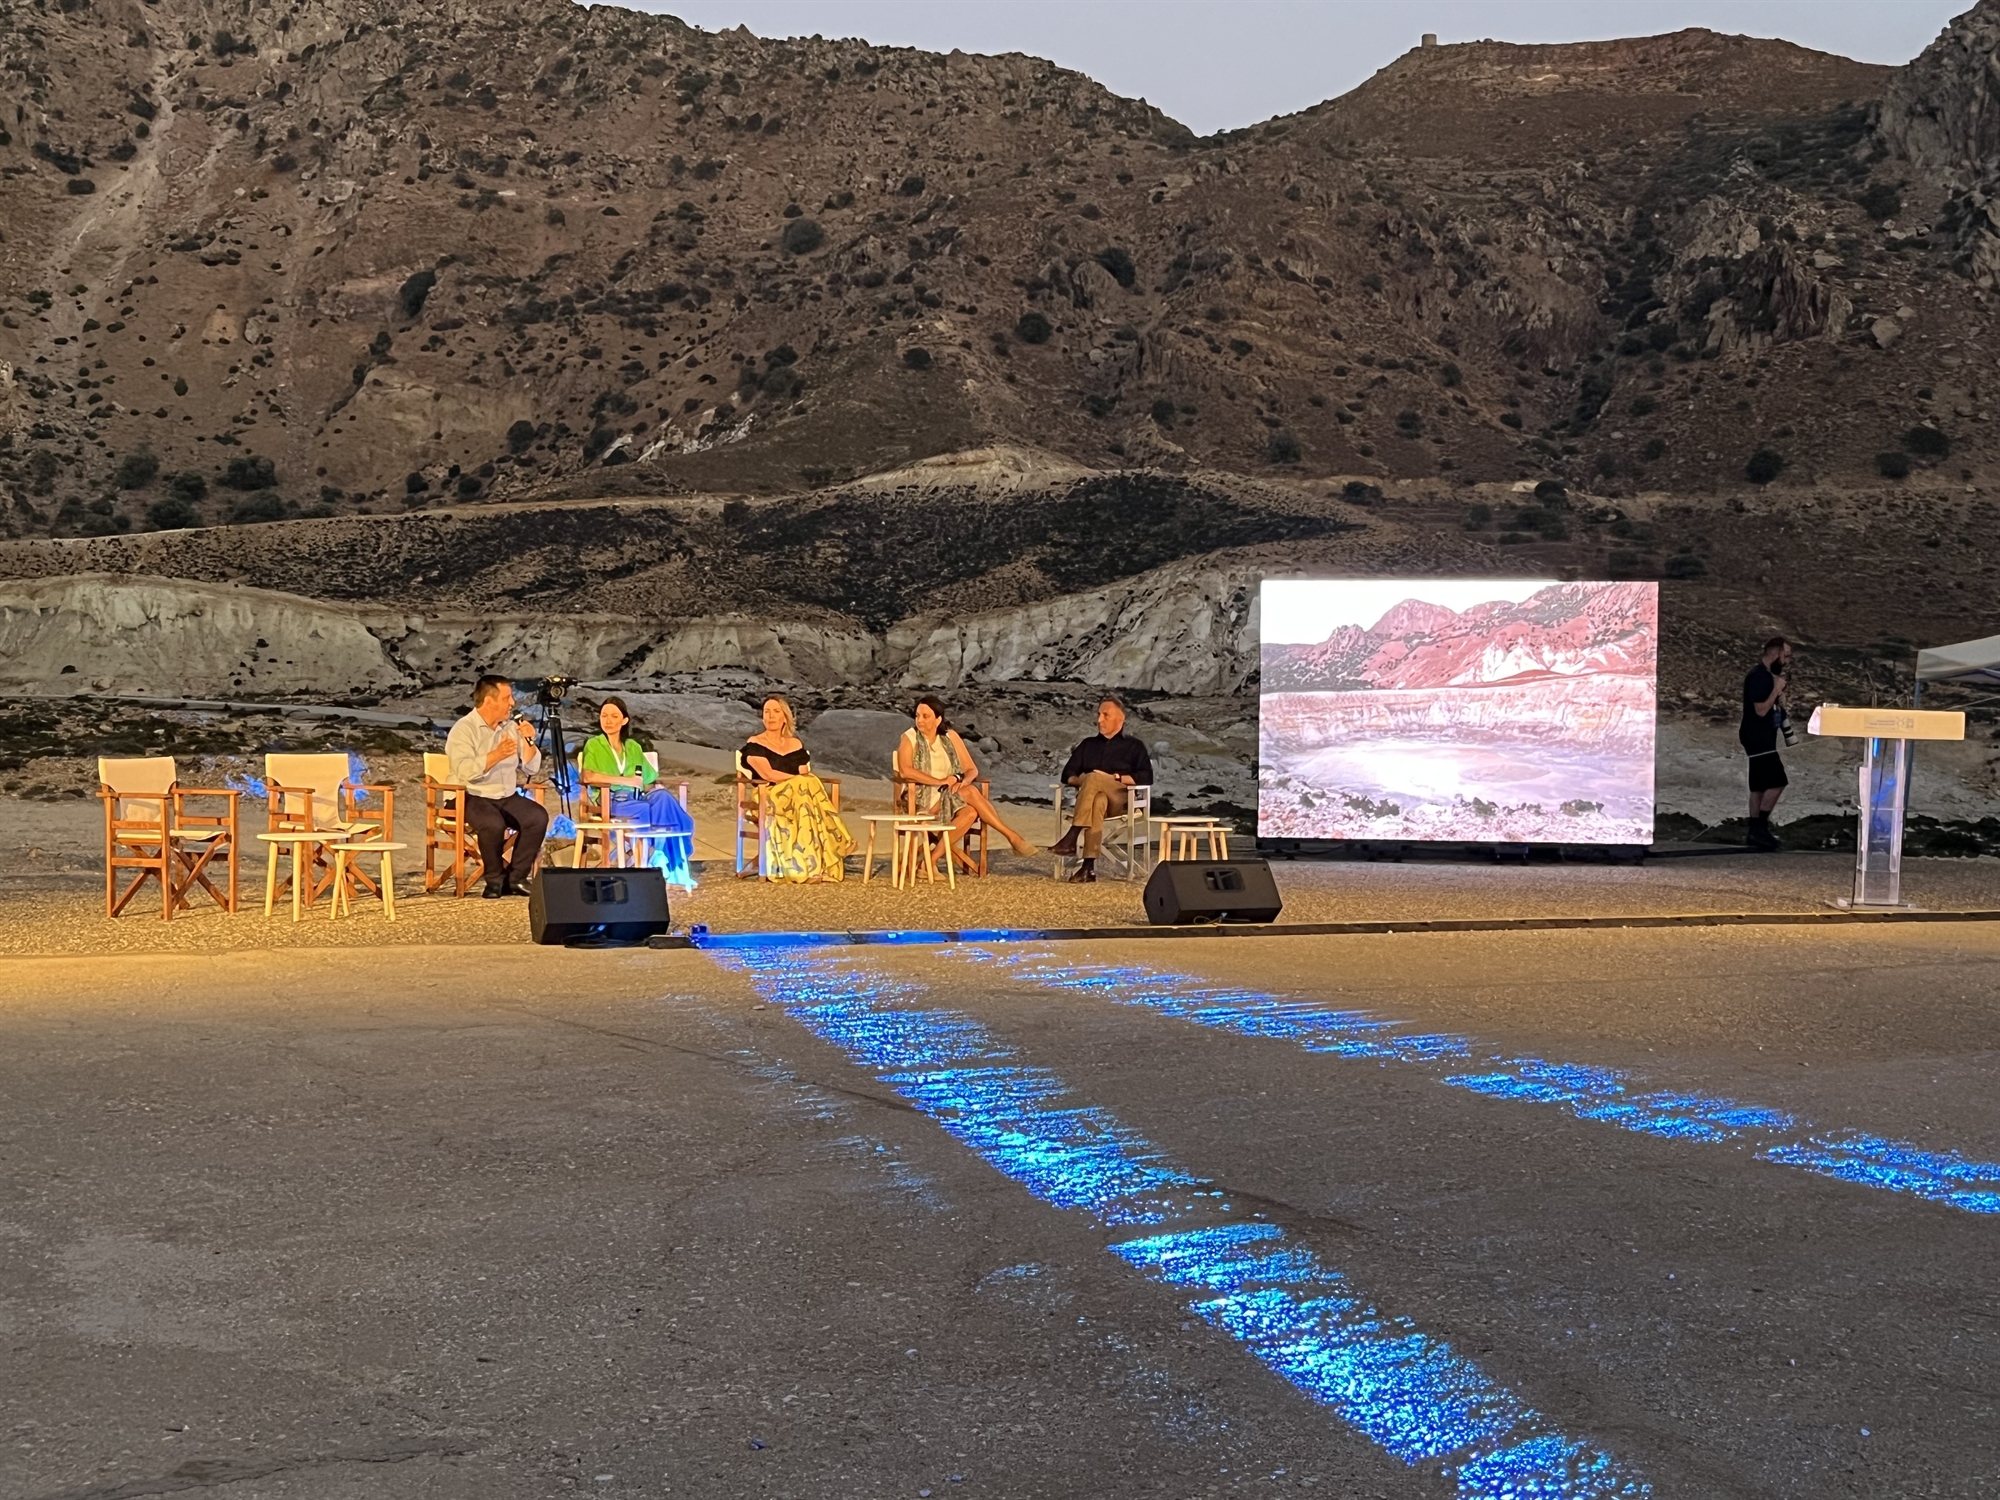 Nisyros Dialogues delve into island sustainability and geopolitics